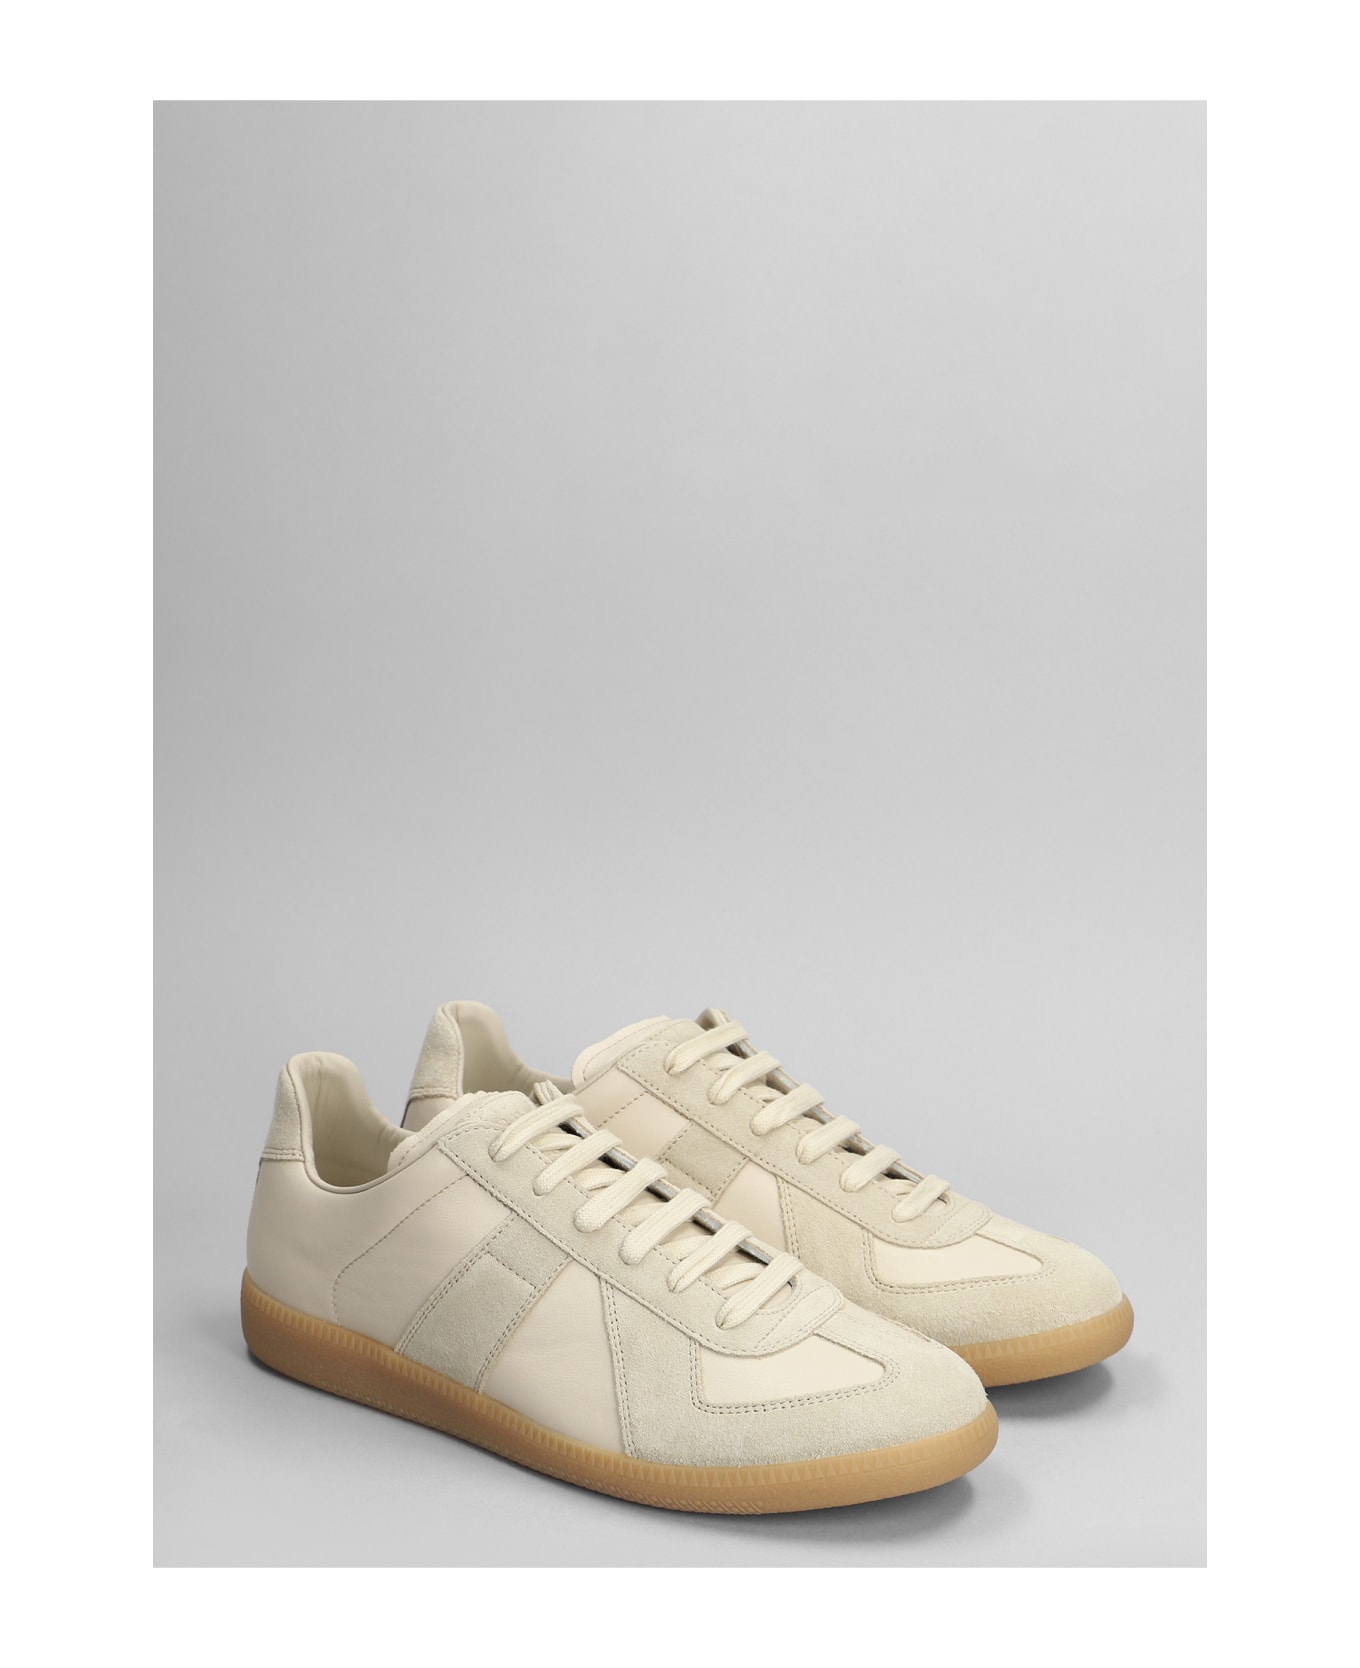 Maison Margiela Replica Sneakers In Beige Suede And Leather - beige